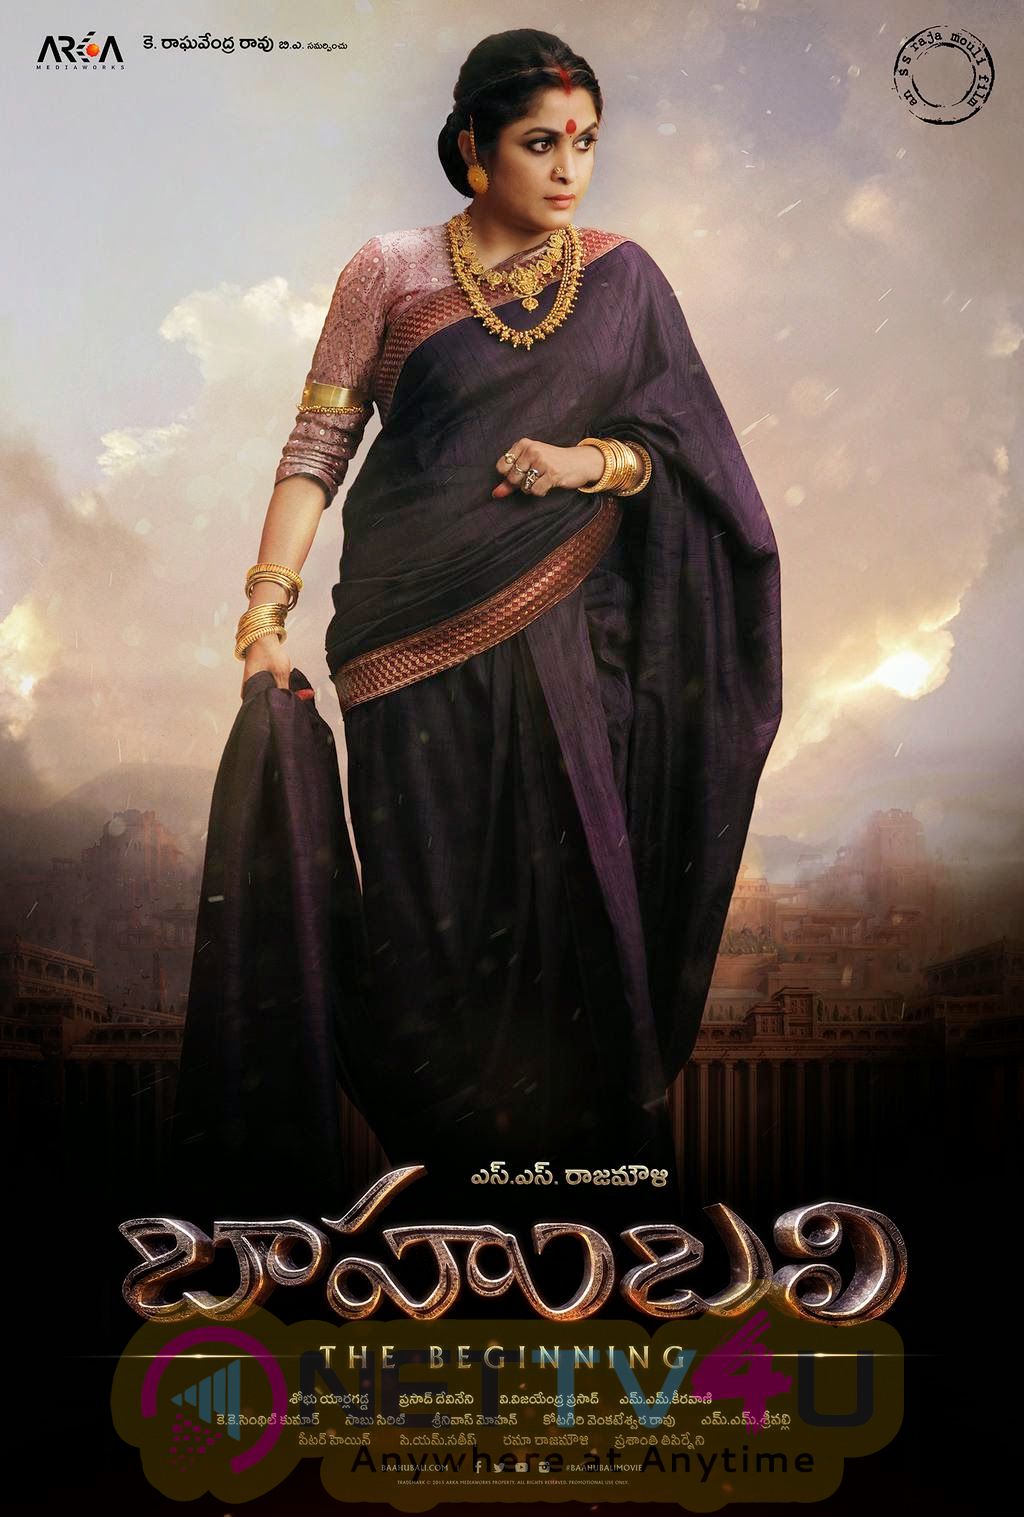 wallpapers and posters for baahubali telugu movie 30 days 7